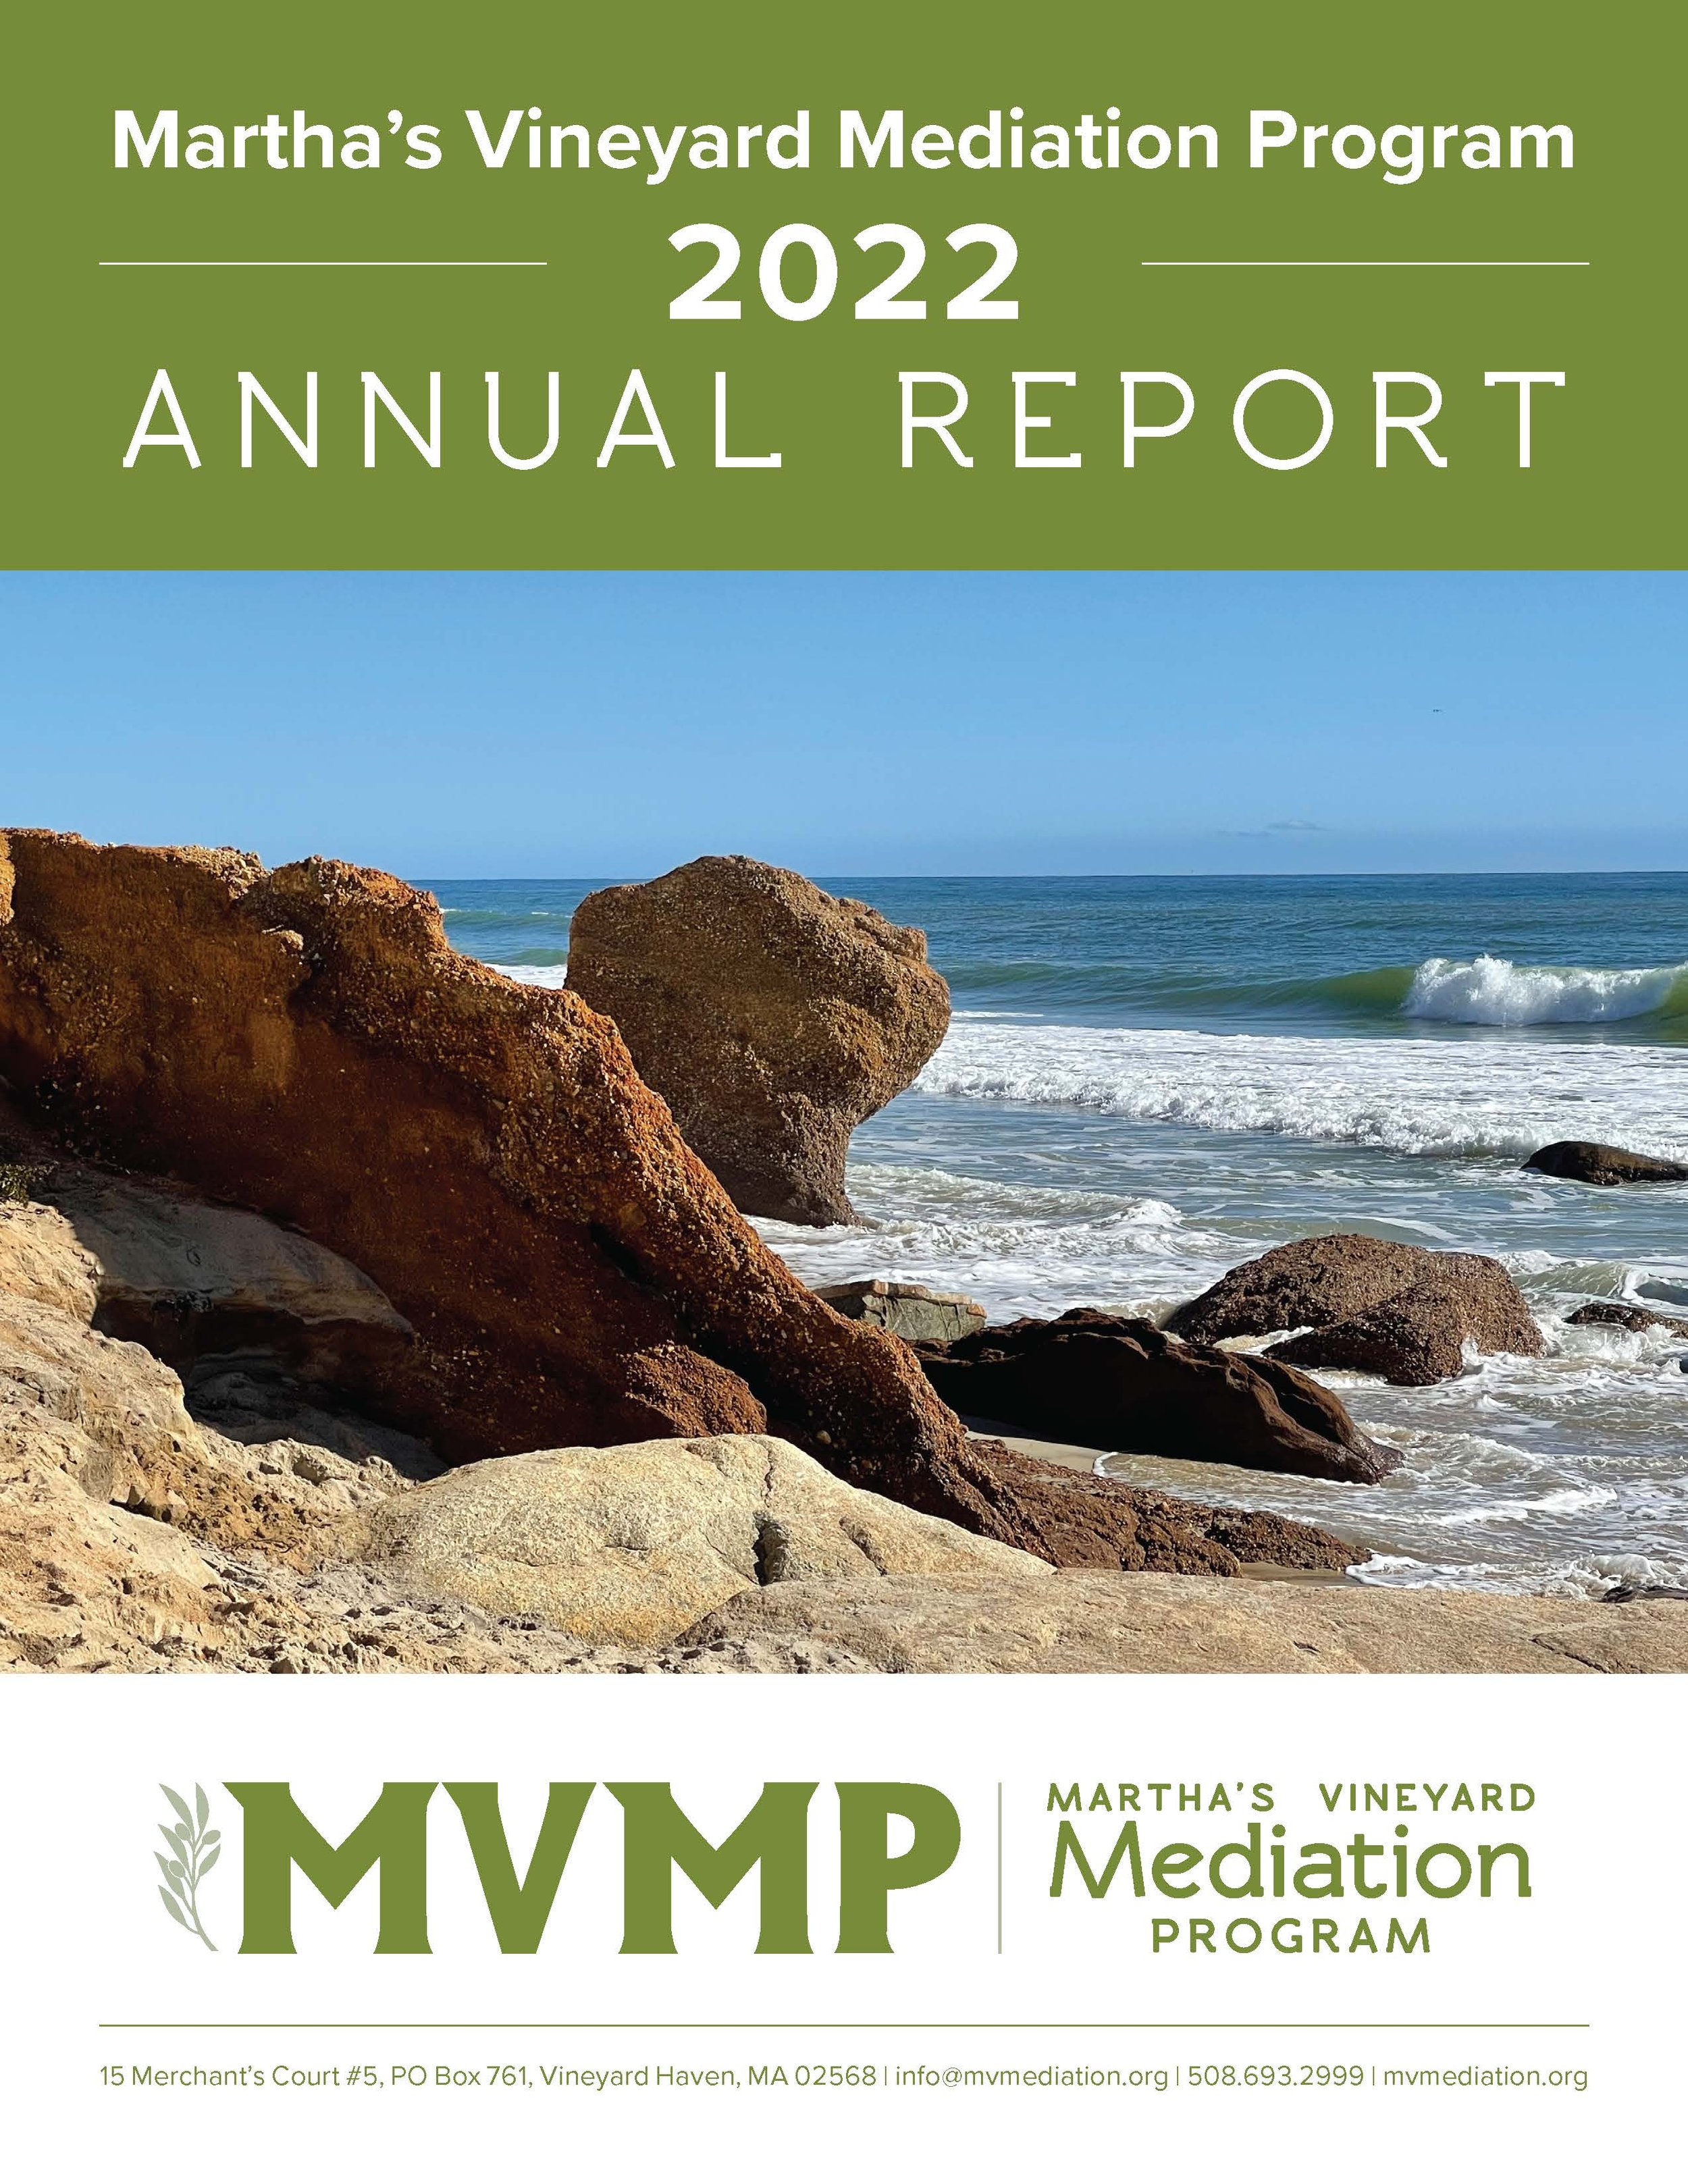 MVMP Annual Report_2022_FOR WEB (1)_Page_01.jpg